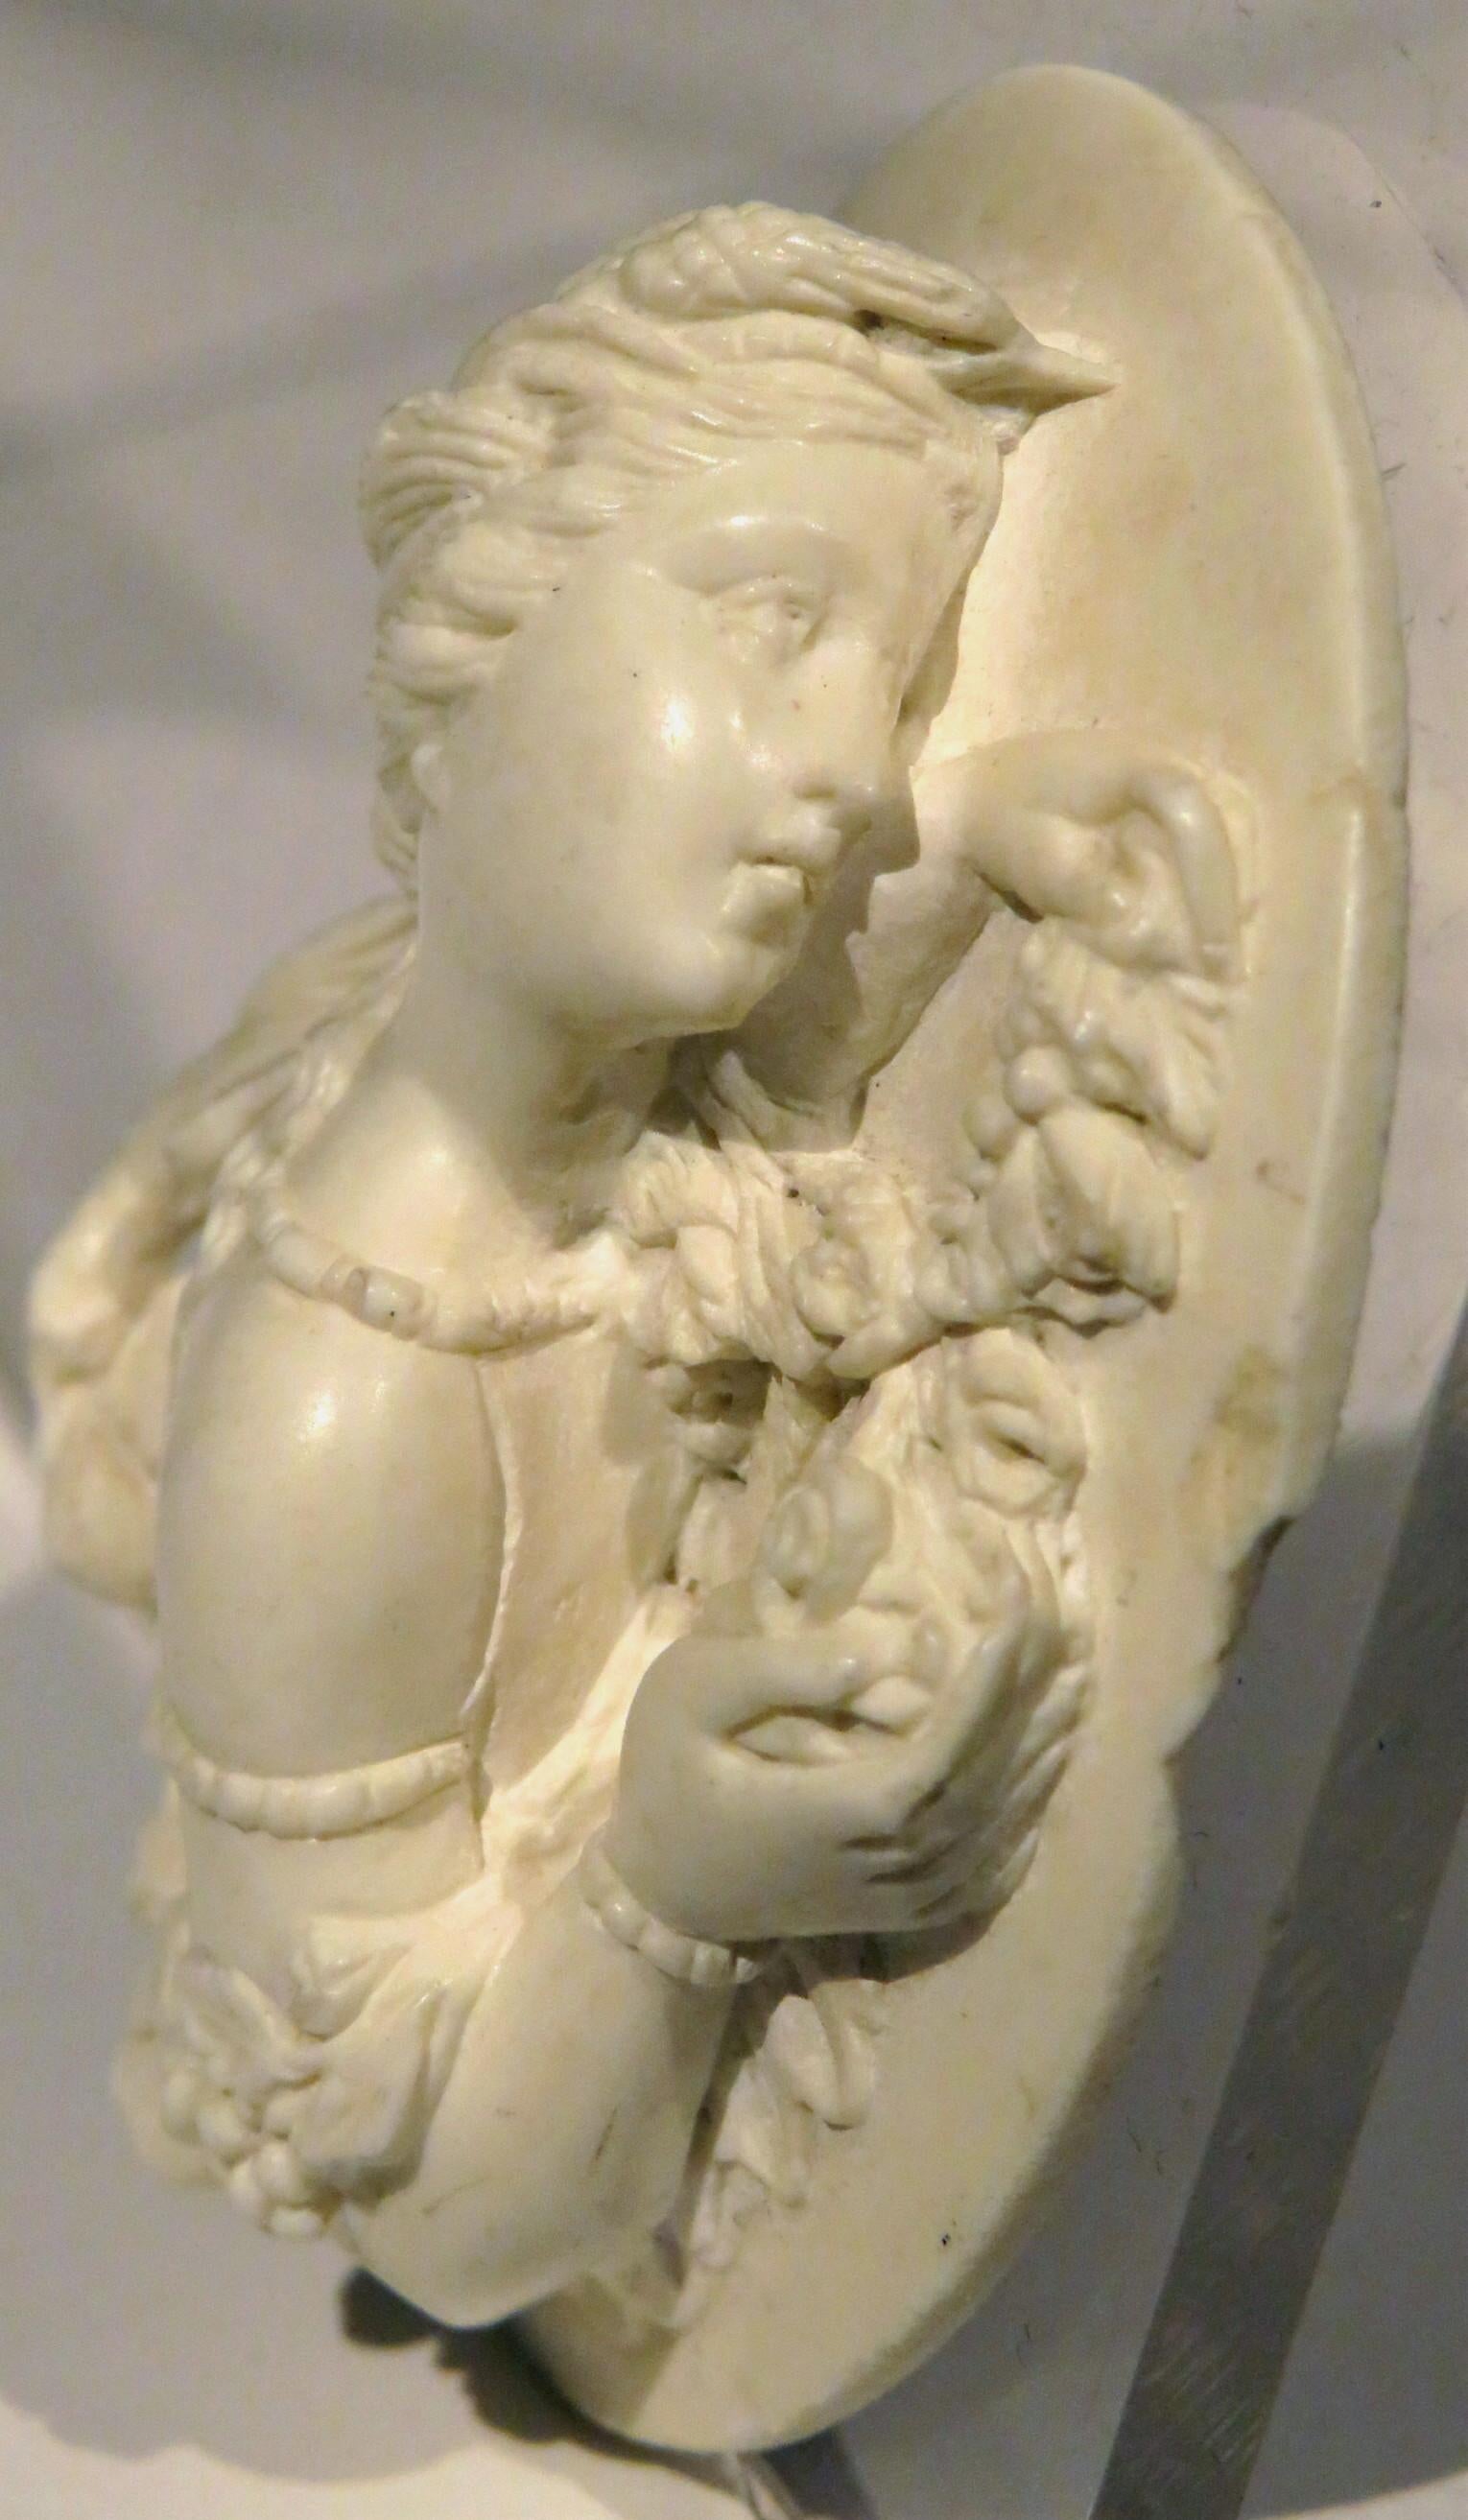 A finely executed lava cameo, sculpted in high relief with exacting proportions and detail, depicting a beautiful young woman rendered in profile against a field of trailing, fruiting vines.
